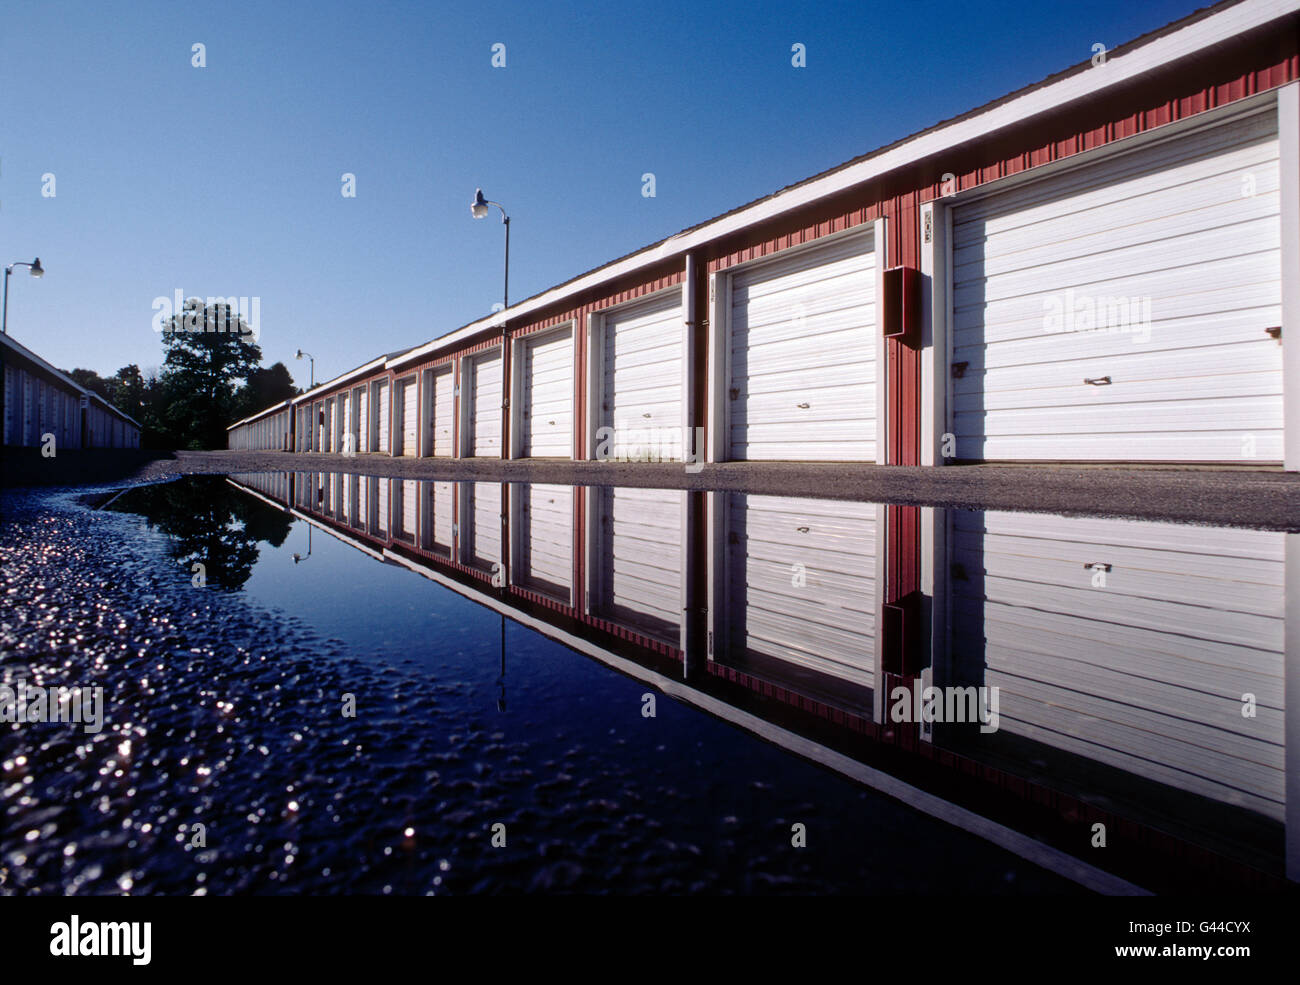 Daytime view of garage like rental storage units lined up in a row Stock Photo